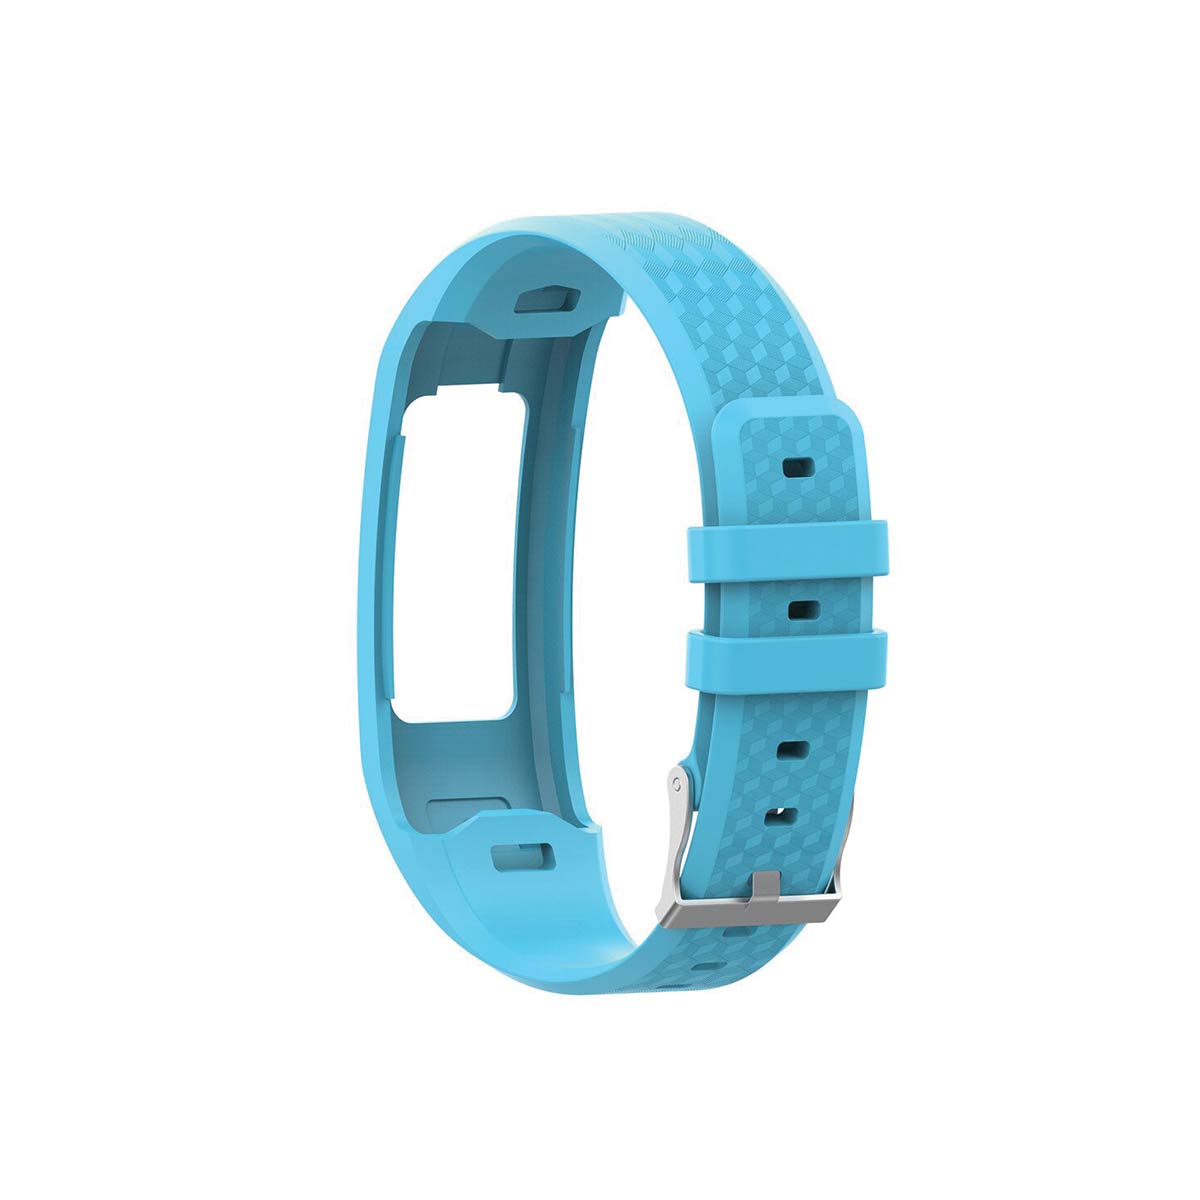 Secure Garmin Vivofit 1 & 2 Band Replacement Strap with Buckle Small Sky Blue 